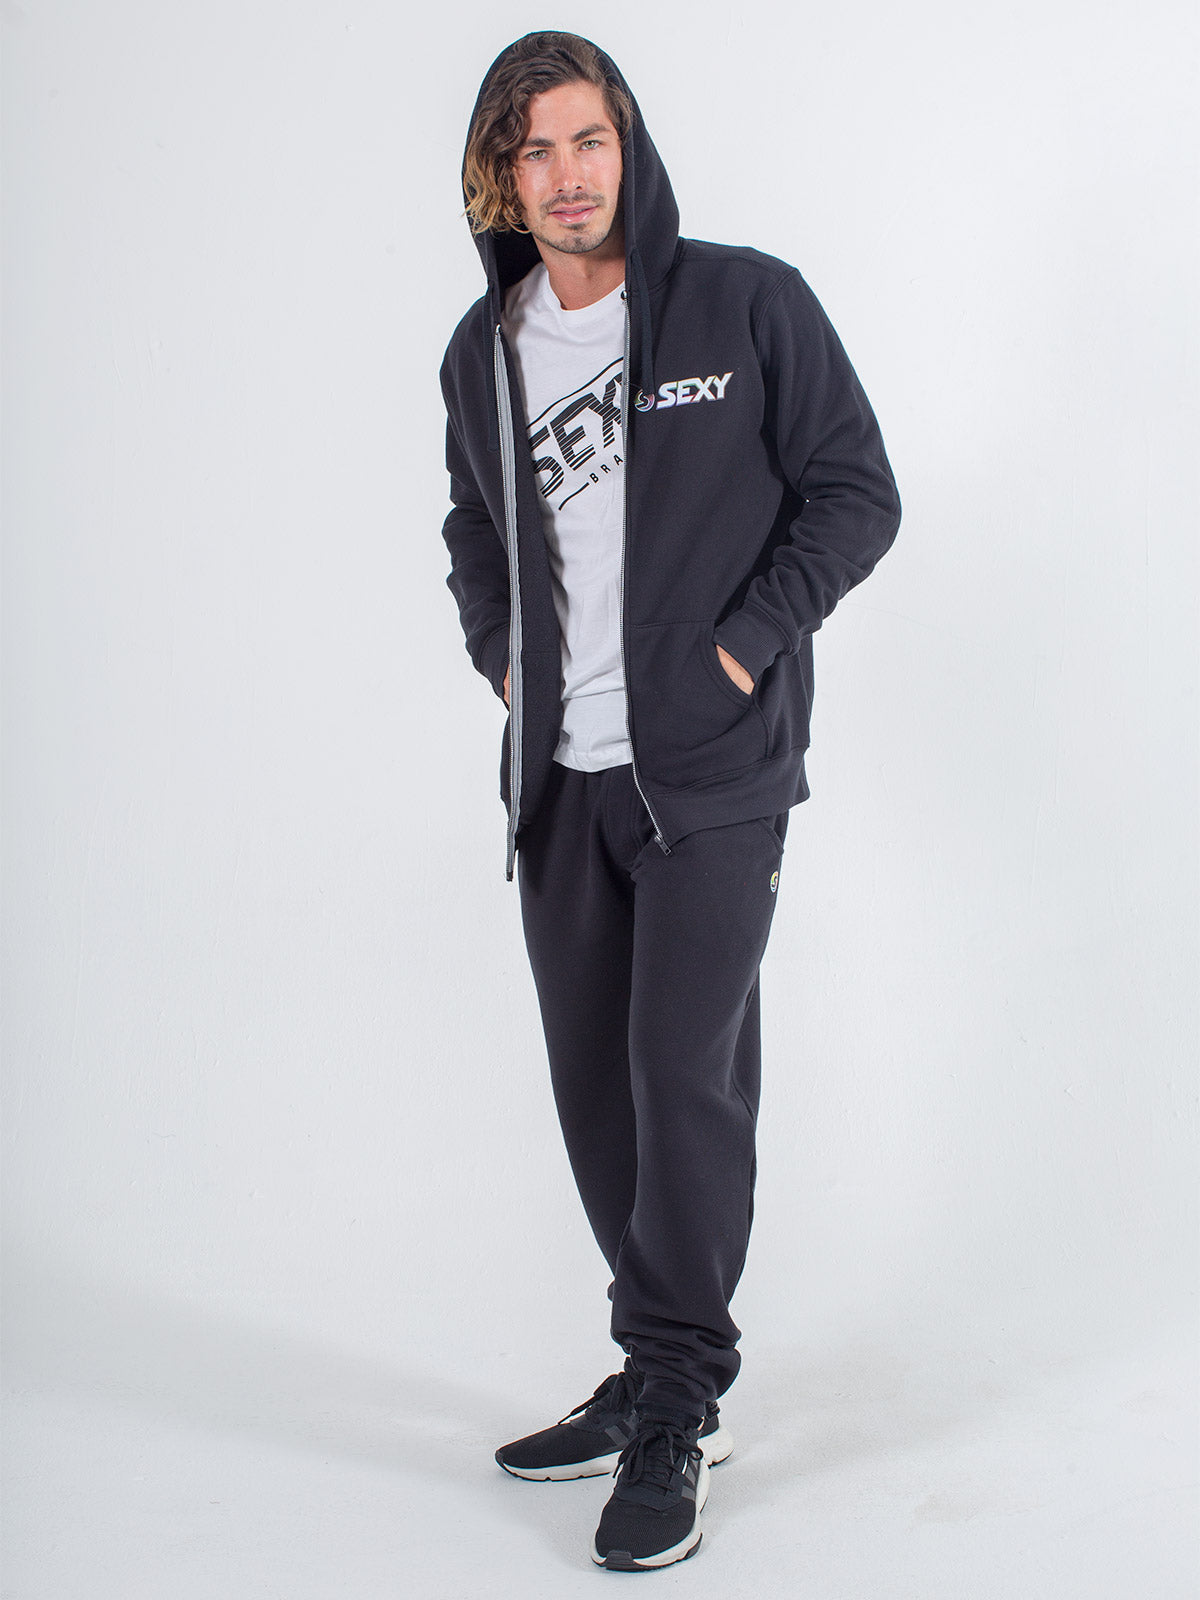 mens sweats joggers sexy brand in black with white t-shirt and black zip up hoodie